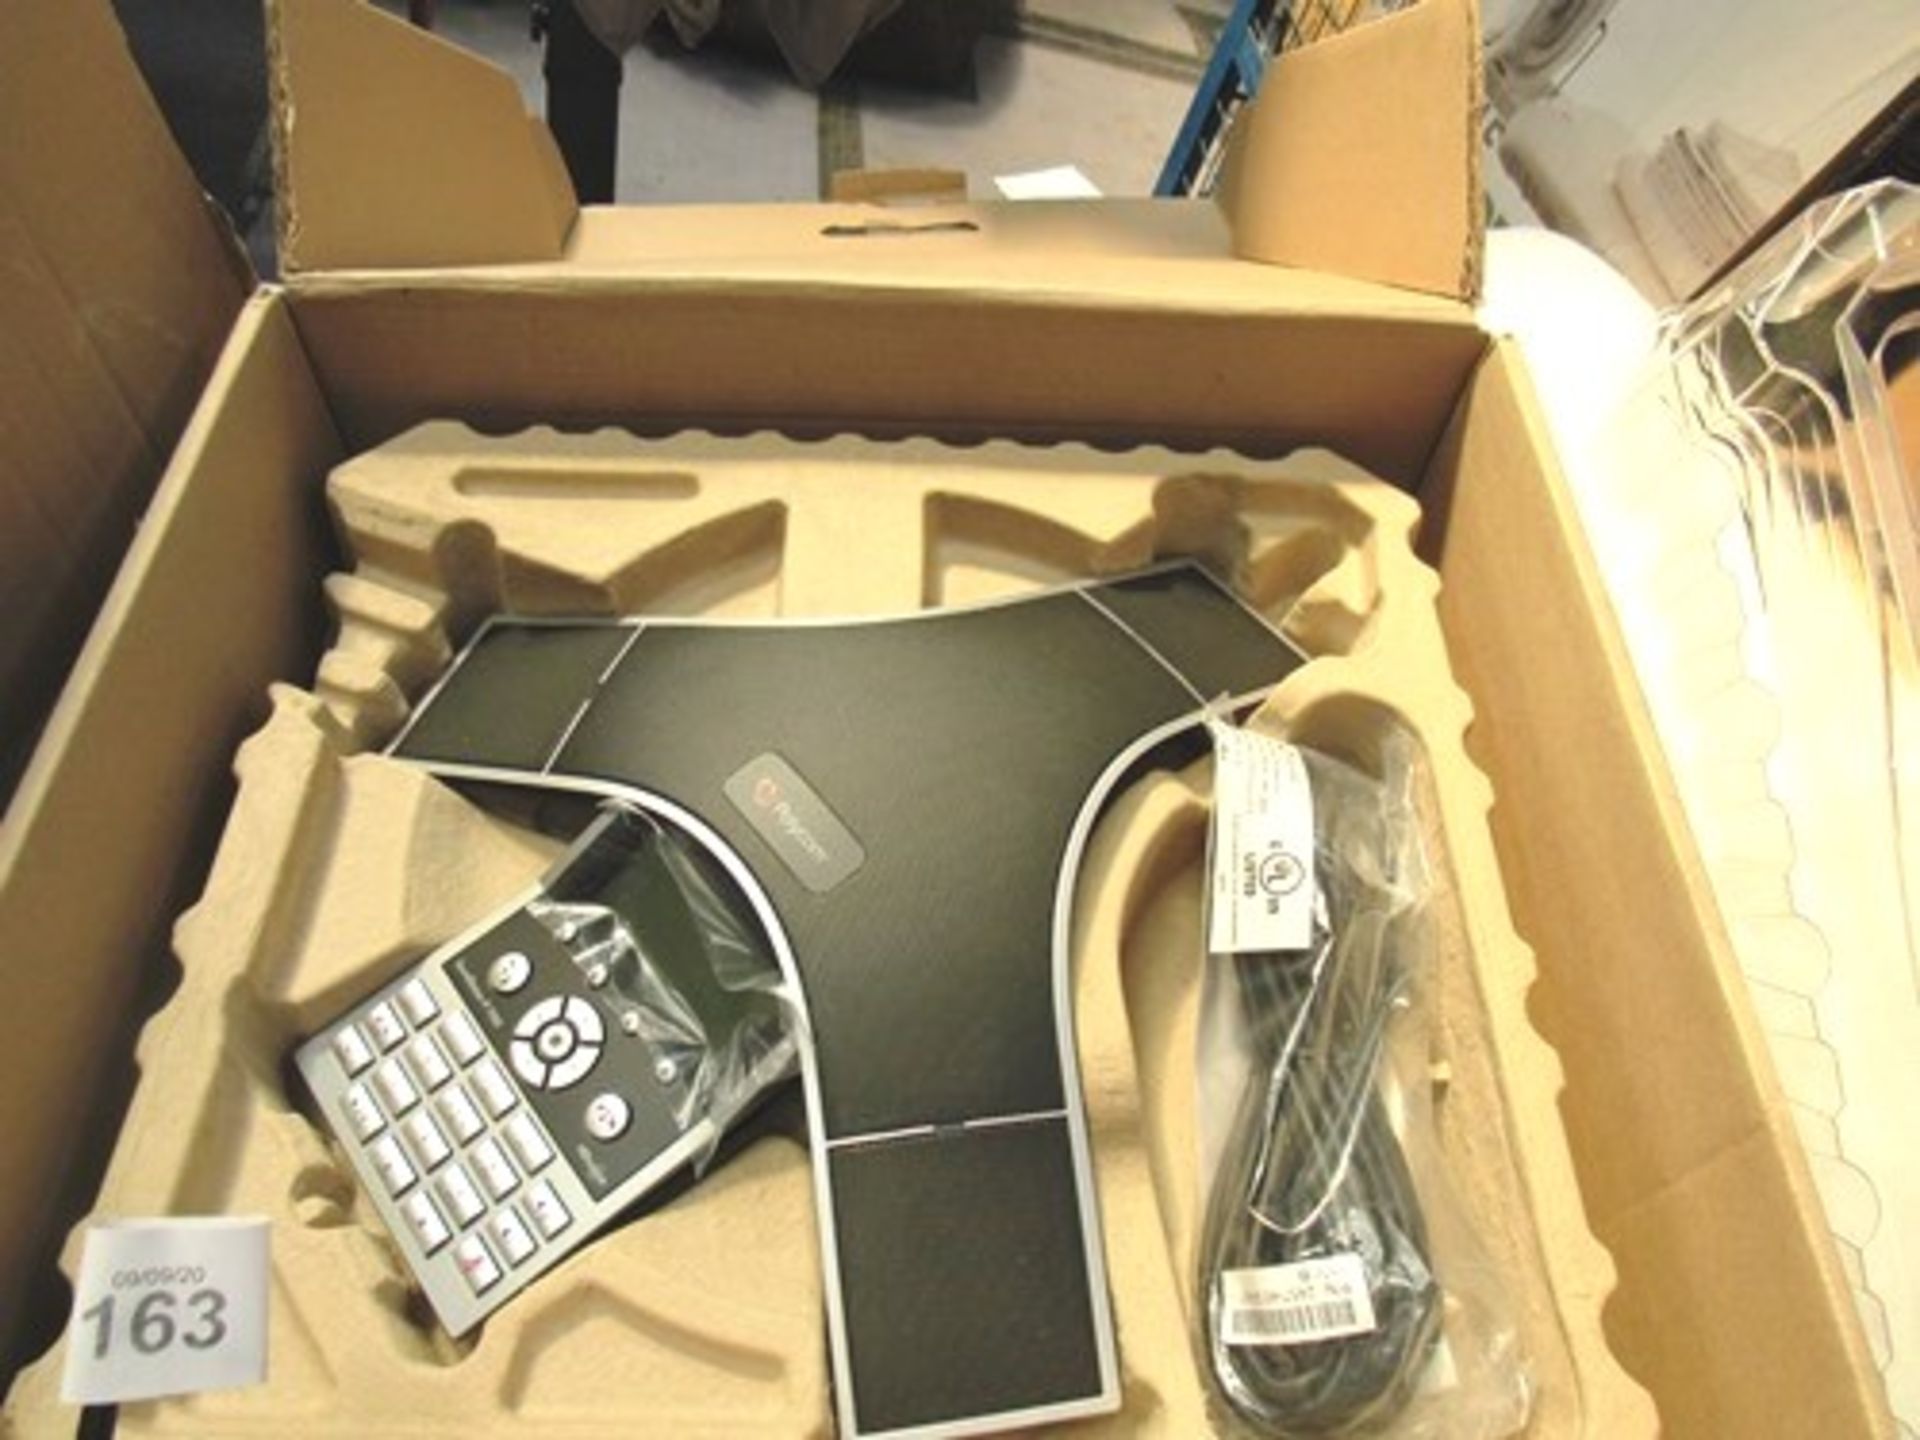 1 x Polycom SoundStation IP7000 POE conference phone, P.N. 2200-4000-001 - New in box, box open ( - Image 4 of 4